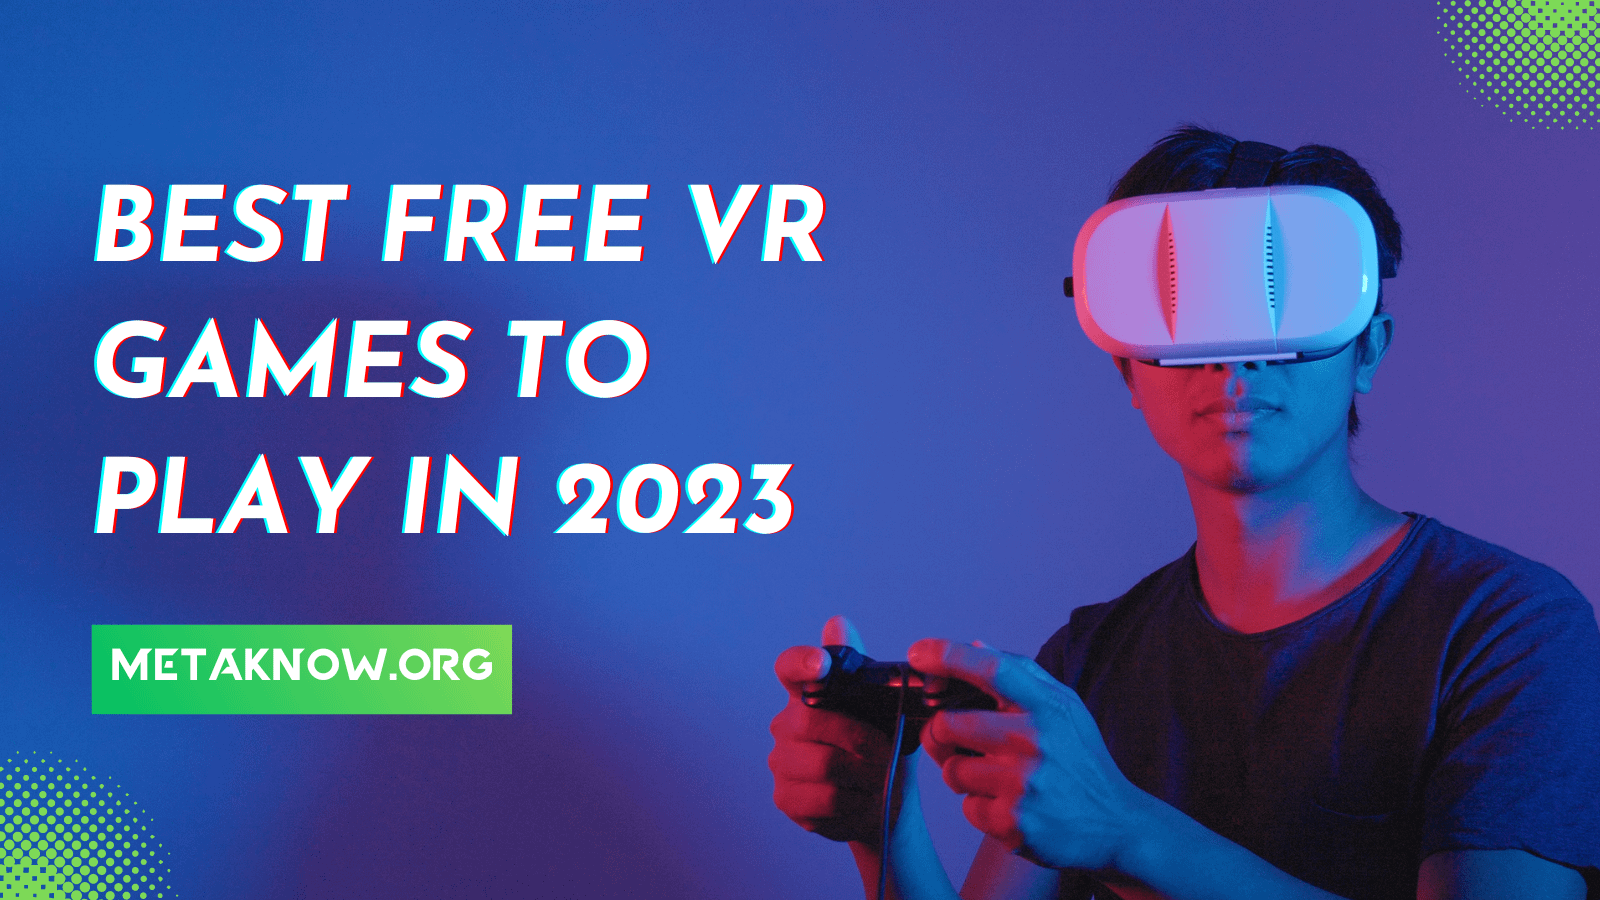 Best Free VR Games to Play in 2023